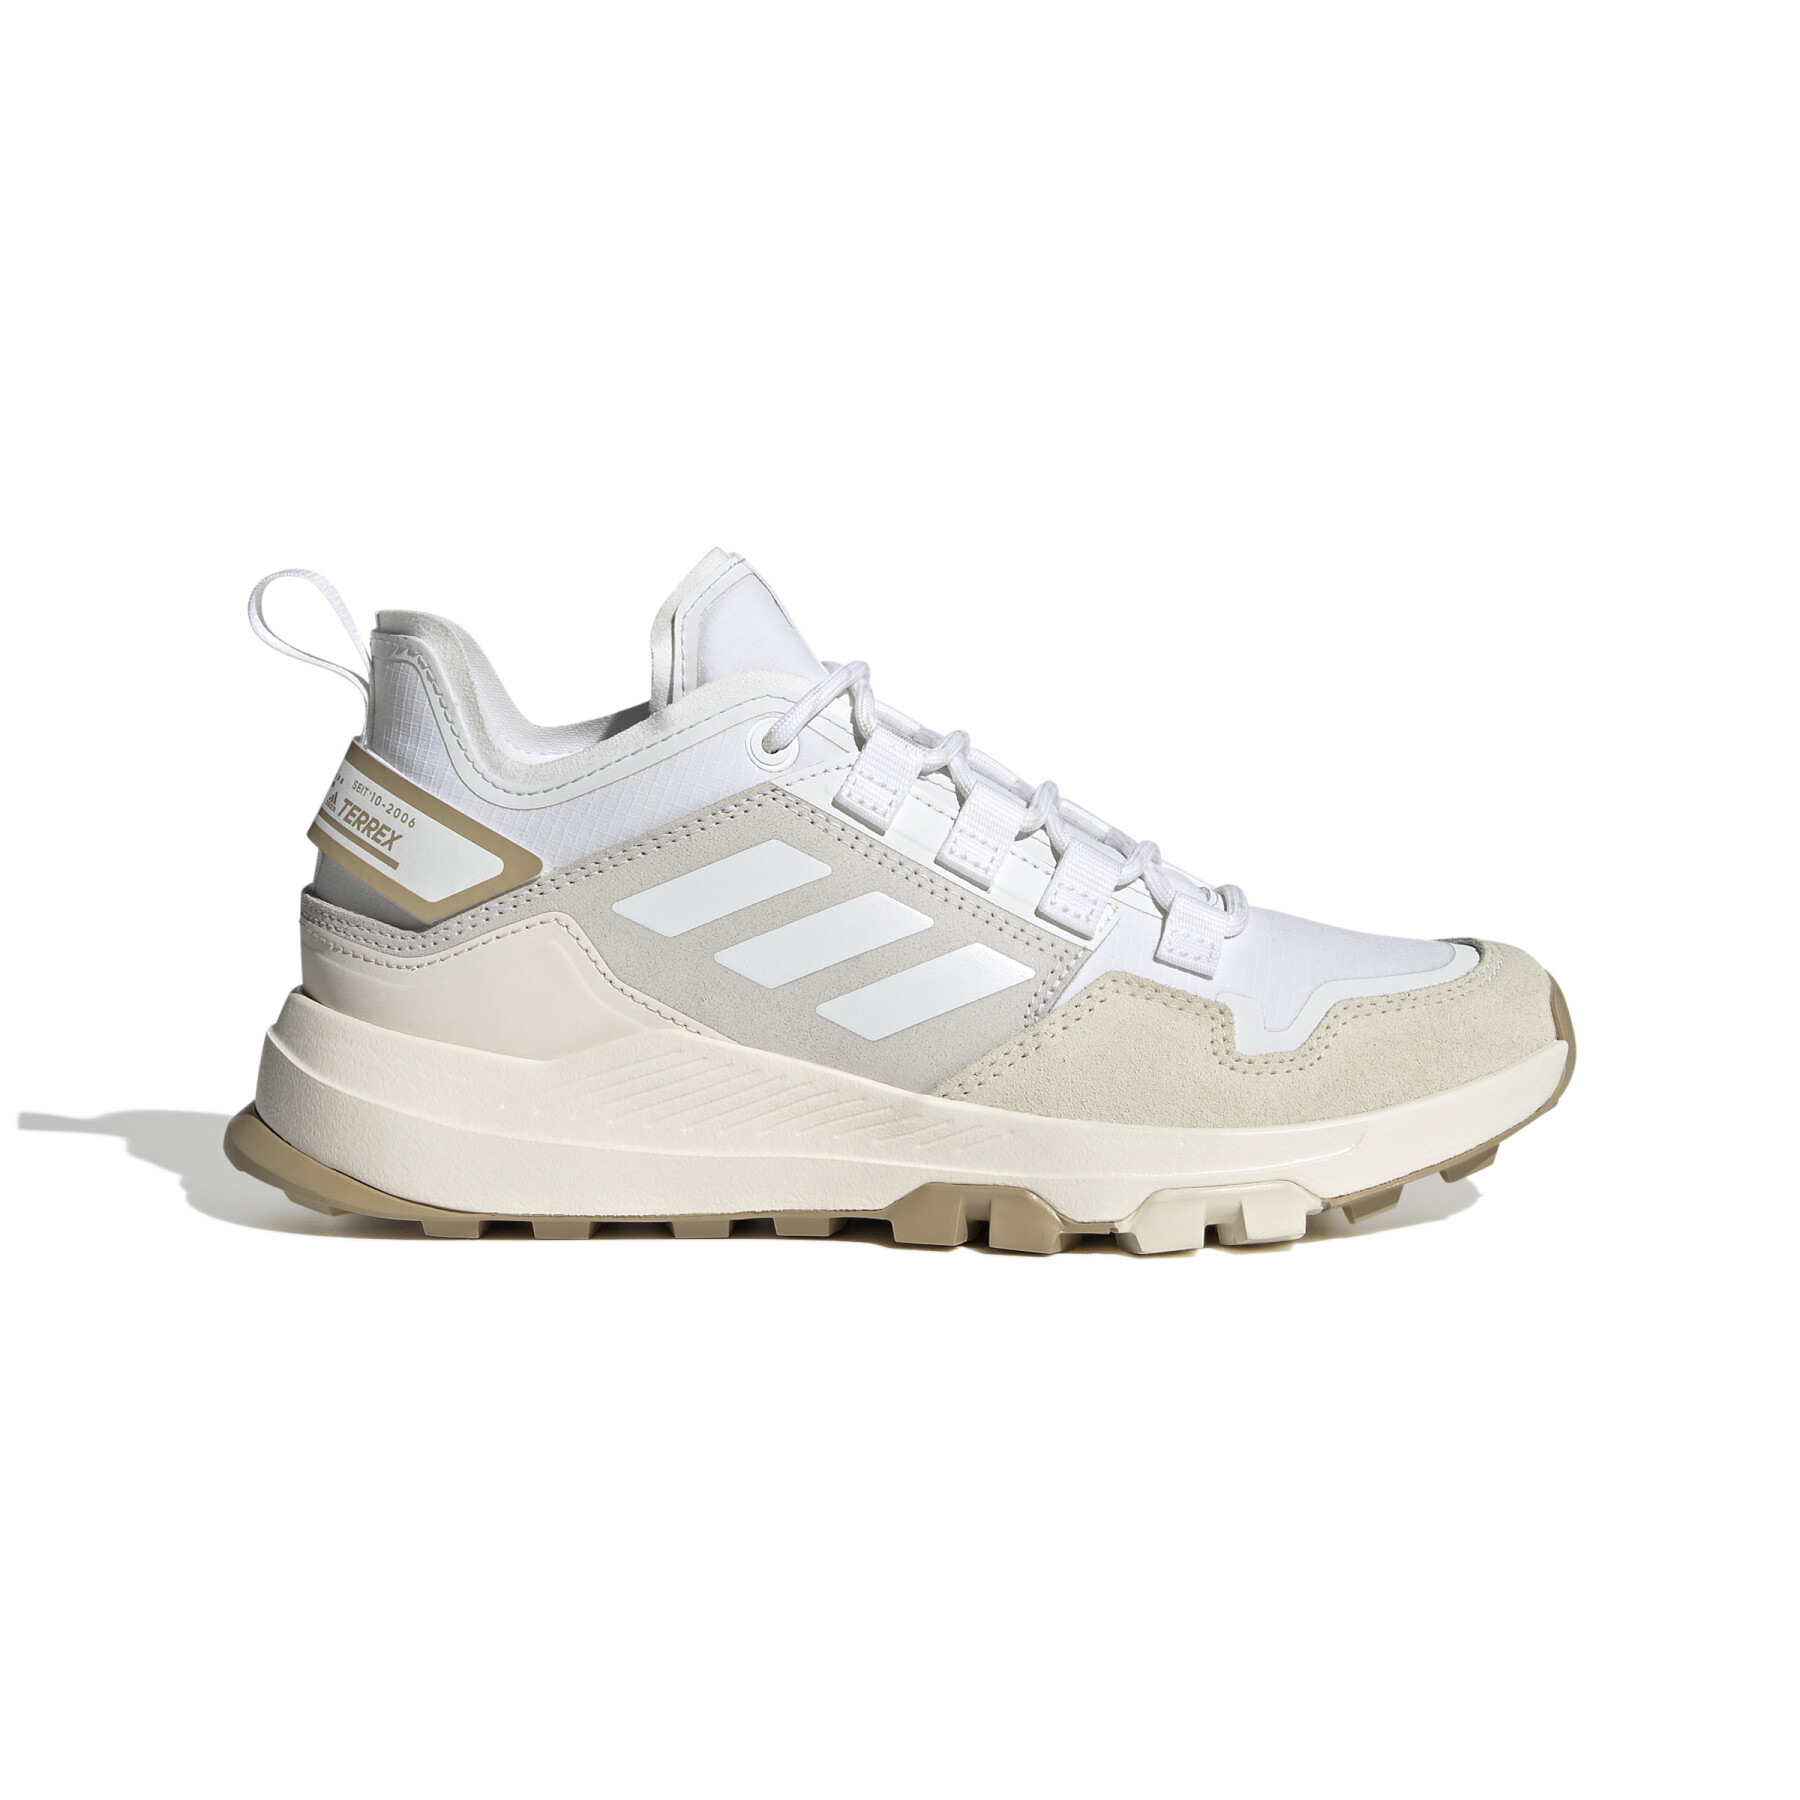 Low hiking shoes for women adidas Terrex Hikster